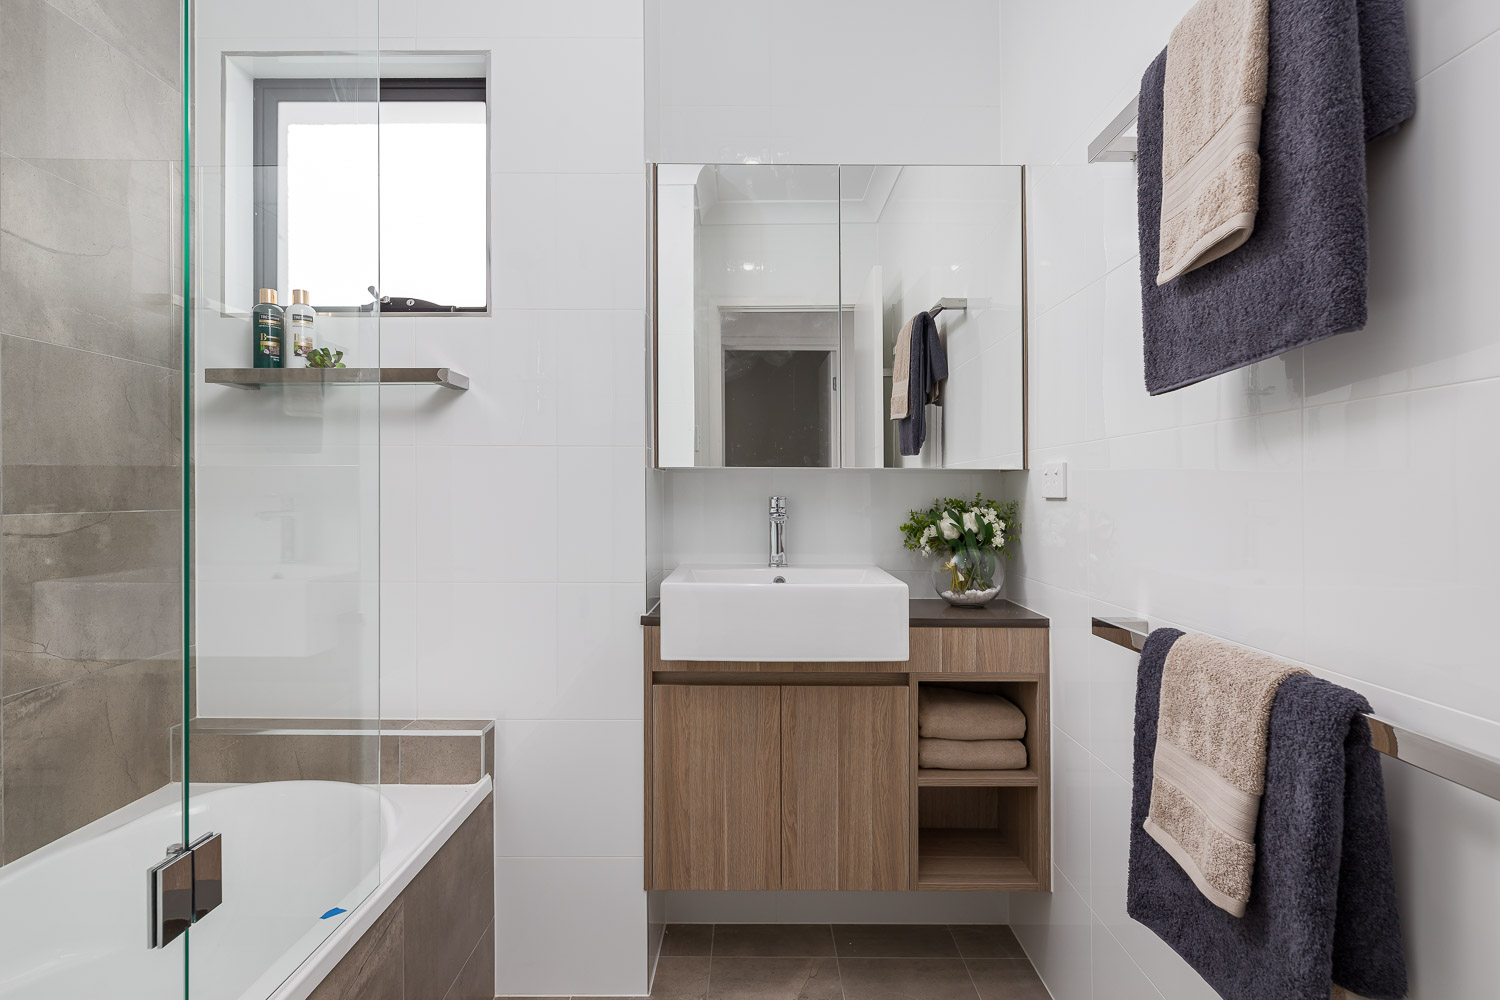 Parc Townhomes Bathroom (image supplied by the developer)